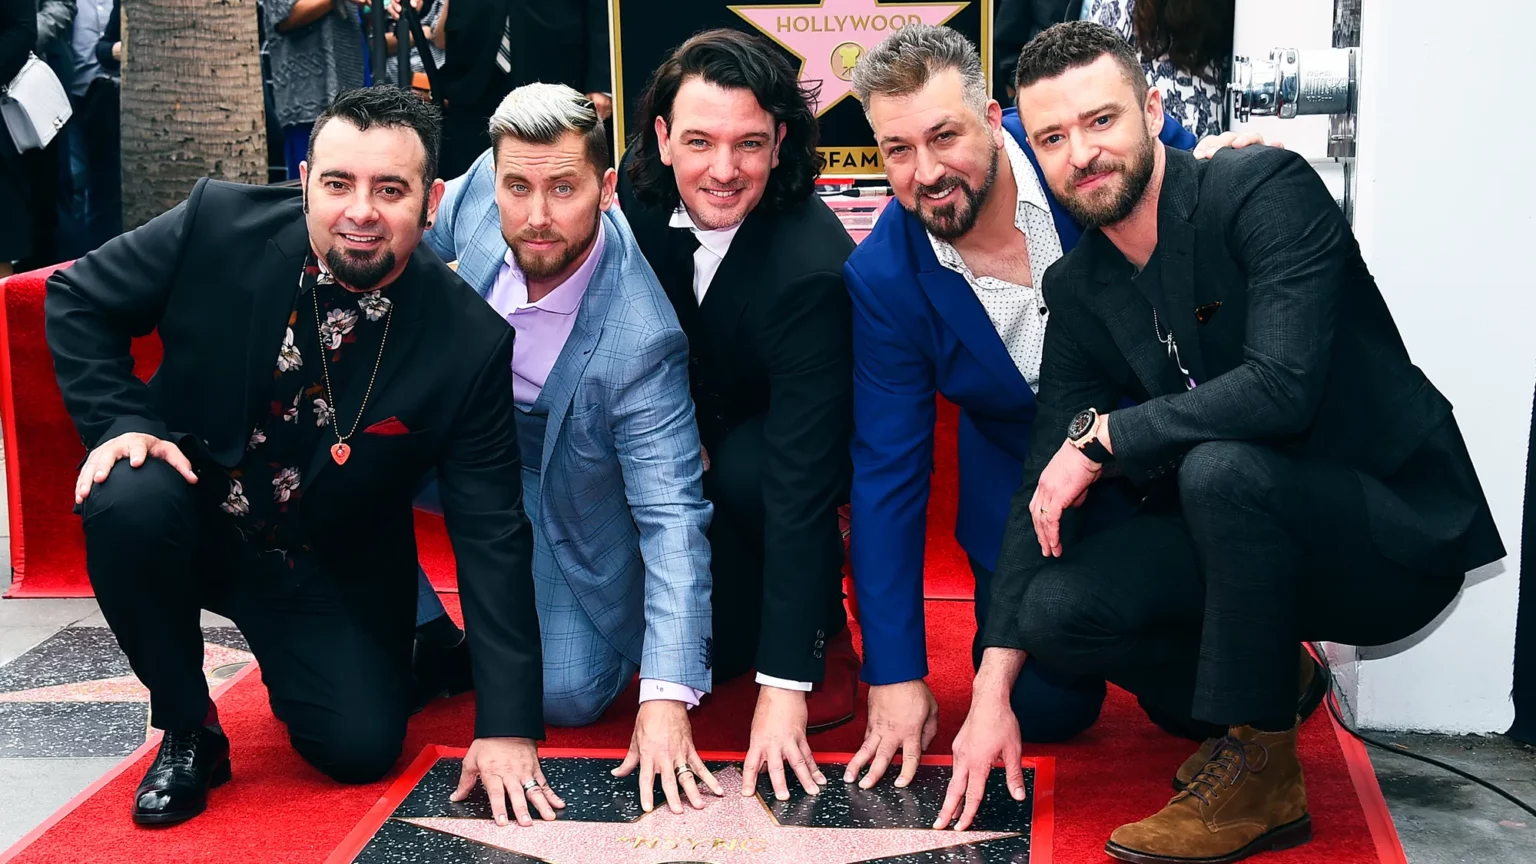 nsync-has-reunited-to-release-their-first-new-song-in-two-decades-for-the-trolls-band-together-movie